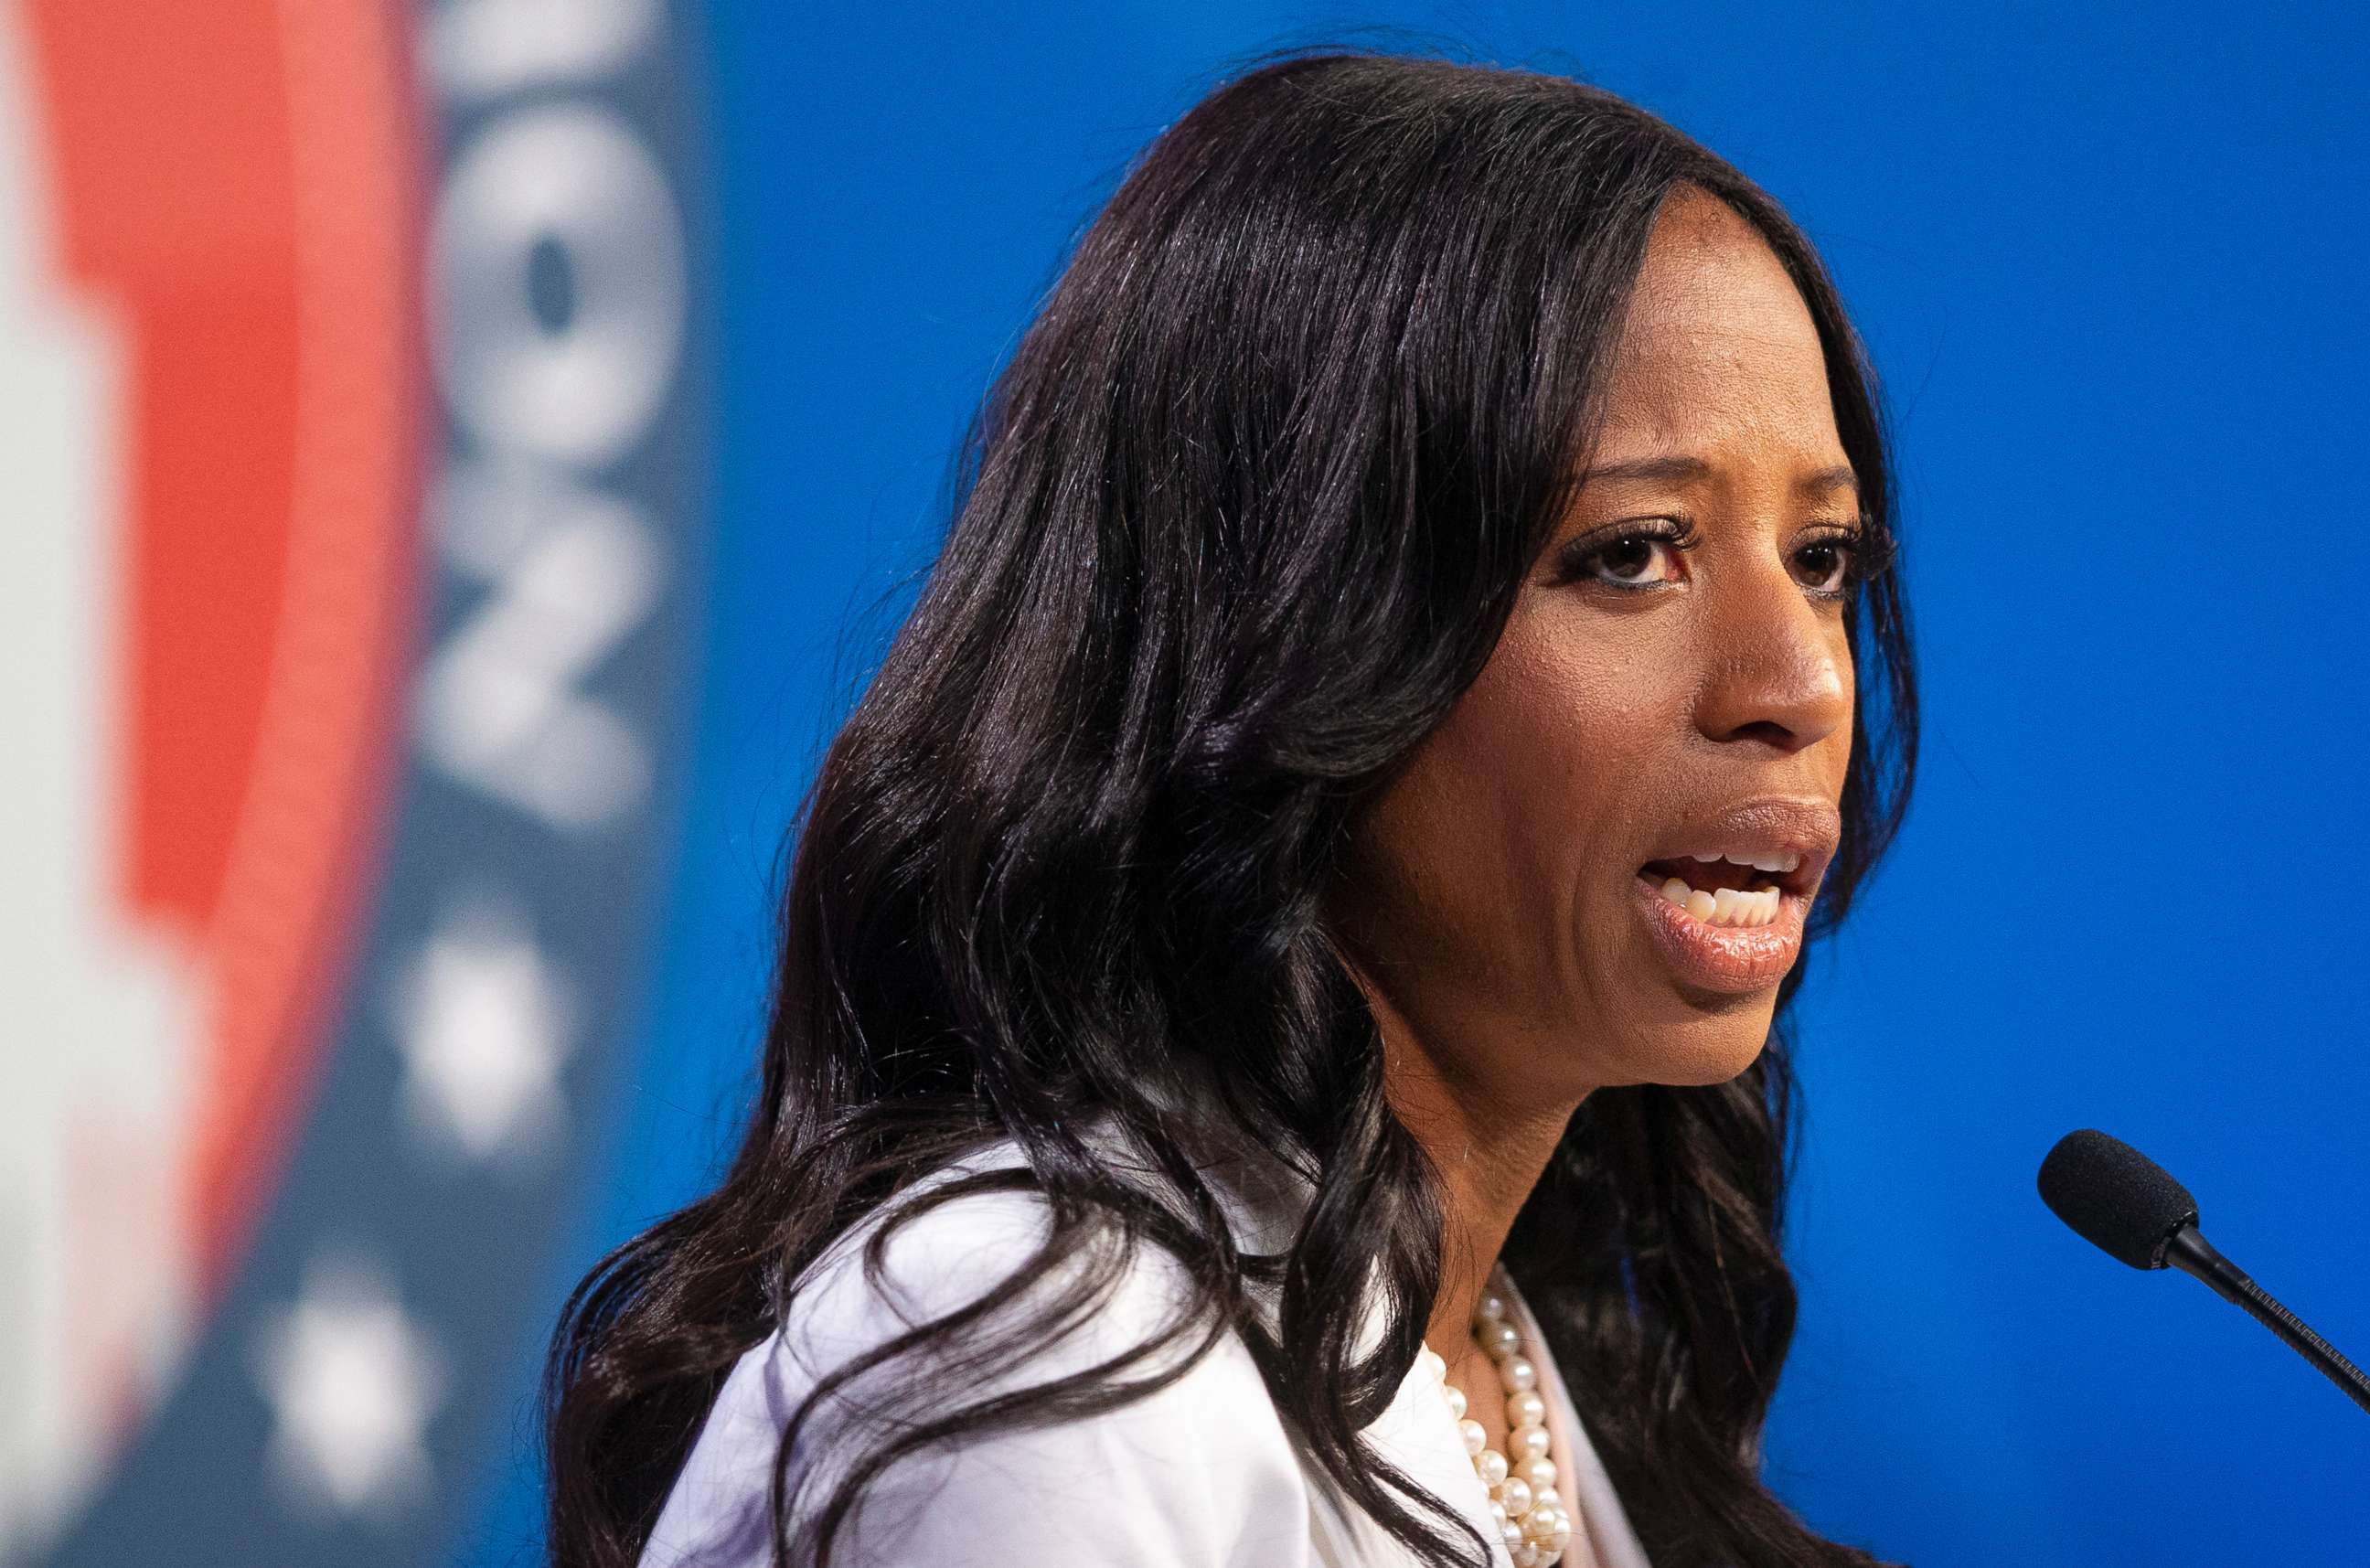 PHOTO: Rep. Mia Love answers a question as she and Salt Lake County Mayor Ben McAdams participate in a debate in Sandy, Utah, Oct. 15, 2018.